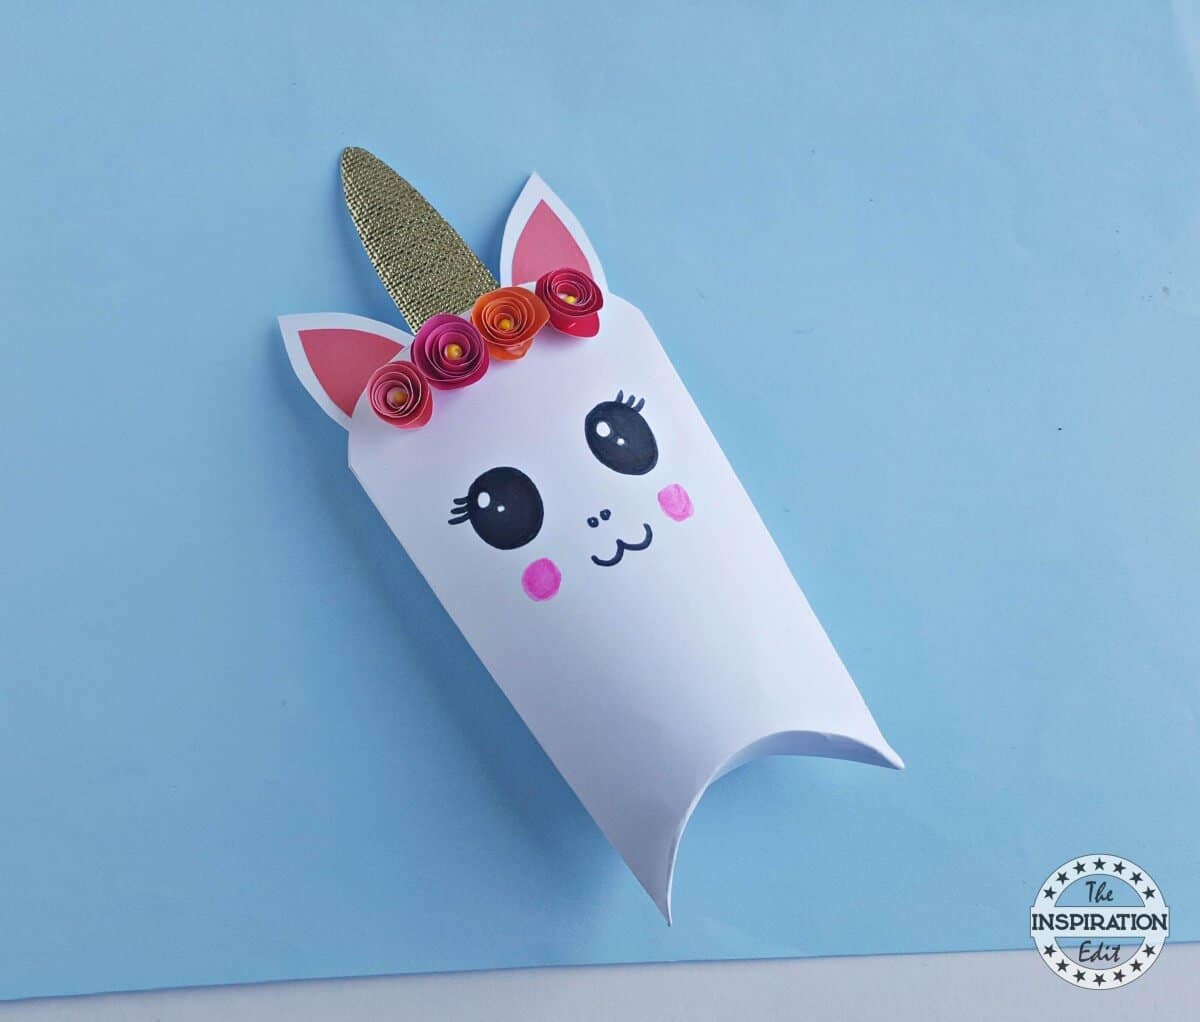 Adorable Unicorn Favor Box With Free Template · The Inspiration Edit